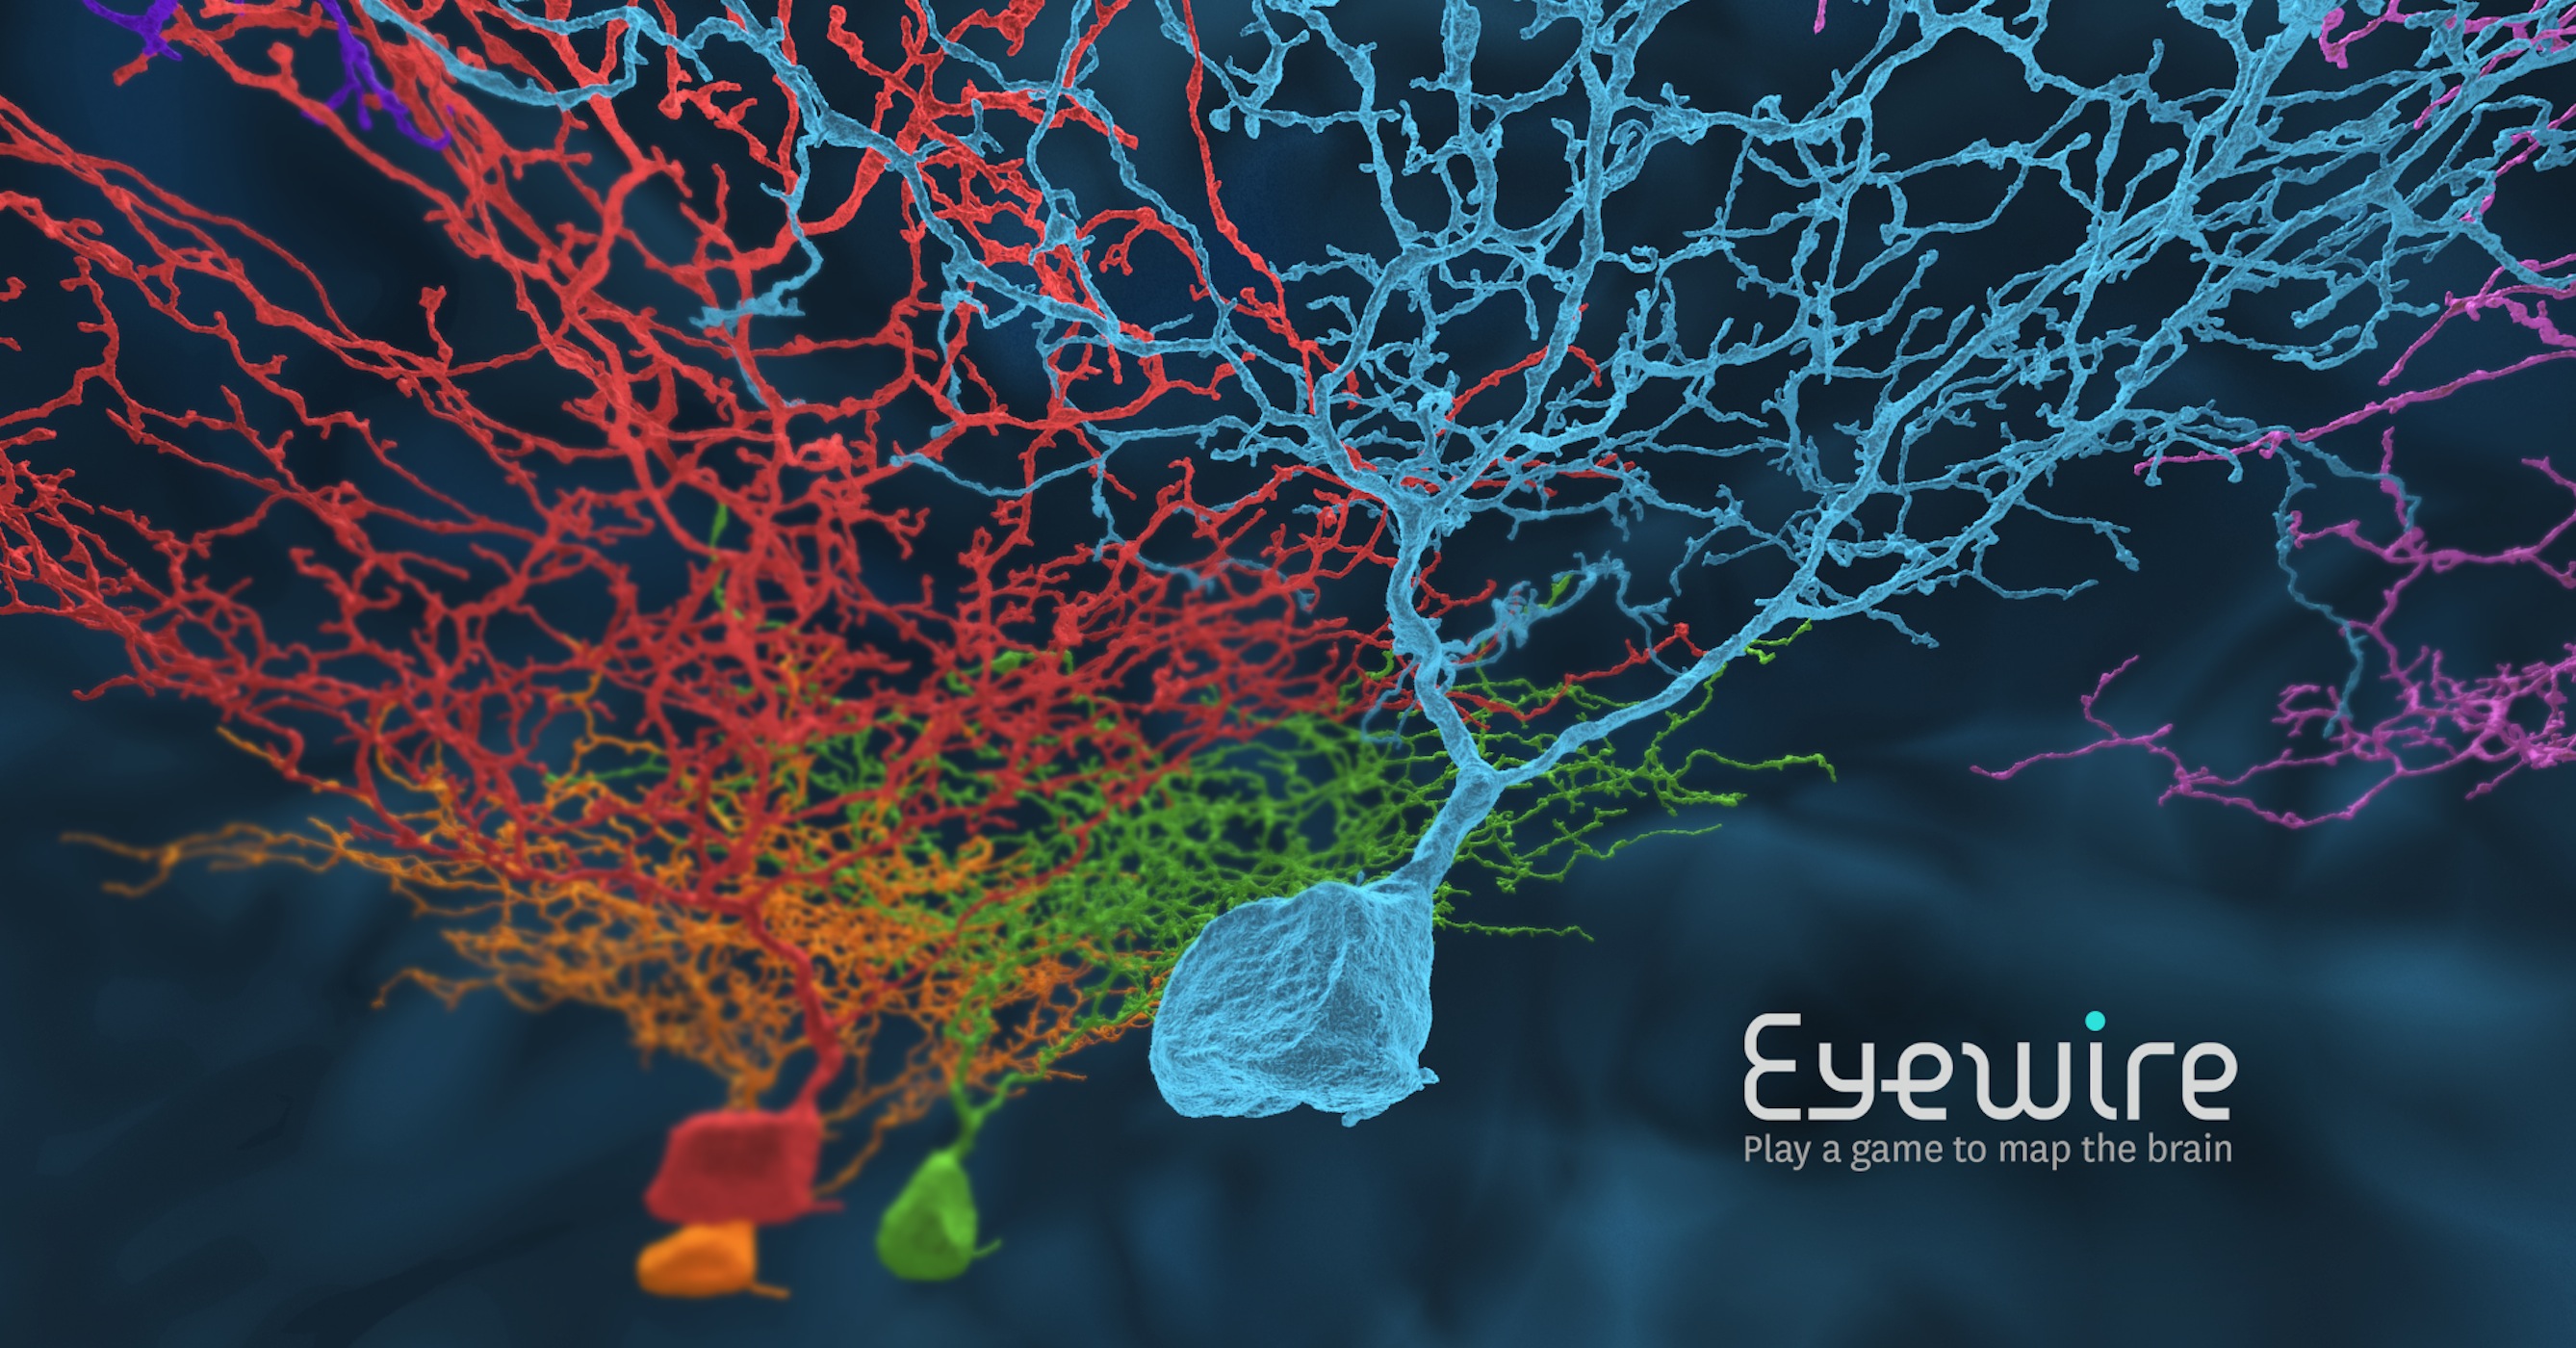 eyewire, game to map the brain, neuroscience, gaming, citizen science, neurons, neuroscience, brain